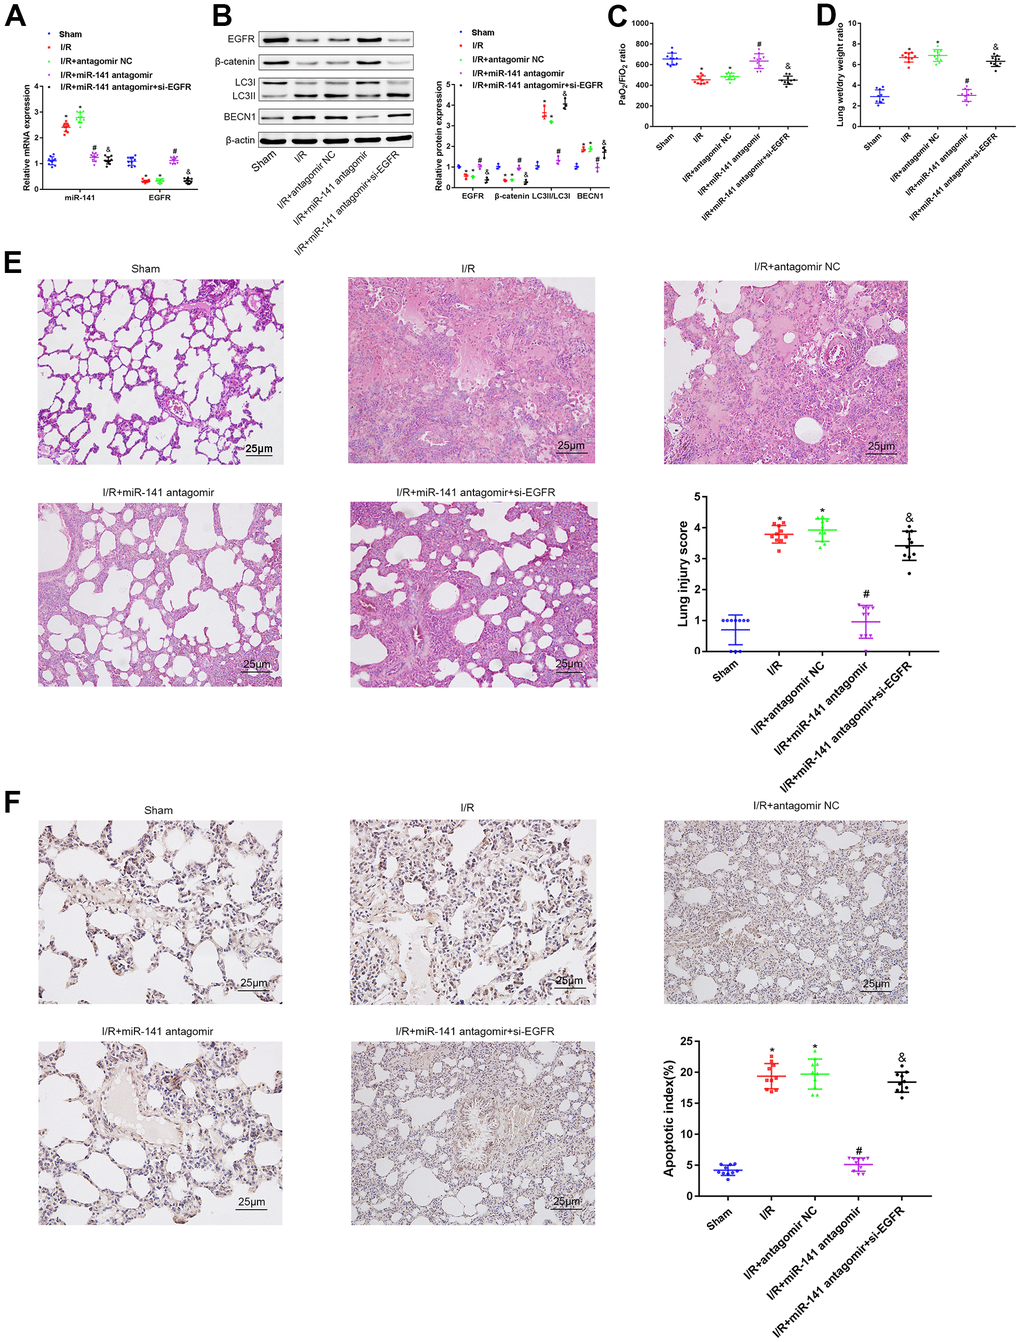 miR-141 inhibits EGFR to downregulate β-catenin, thereby enhancing autophagy to promote lung I/R injury in vivo. (A) RT-qPCR was used to detect the expression of miR-141 and EGFR in mouse lung tissues. (B) Western blotting was used to detect the protein expression of ERFG, β-catenin, LC3II/I and BECN1 in mouse lung tissues. (C) Blood gas analyzer was used to detect the blood gas in arterial blood in left ventricle of mice. (D) The statistical graph of W/D ratio of lung tissues of mice. (E) HE staining results of lung tissues (× 400) and lung injury scores. (F) TUNEL staining (× 200) was used to detect the apoptosis of mouse lung cells. * p 